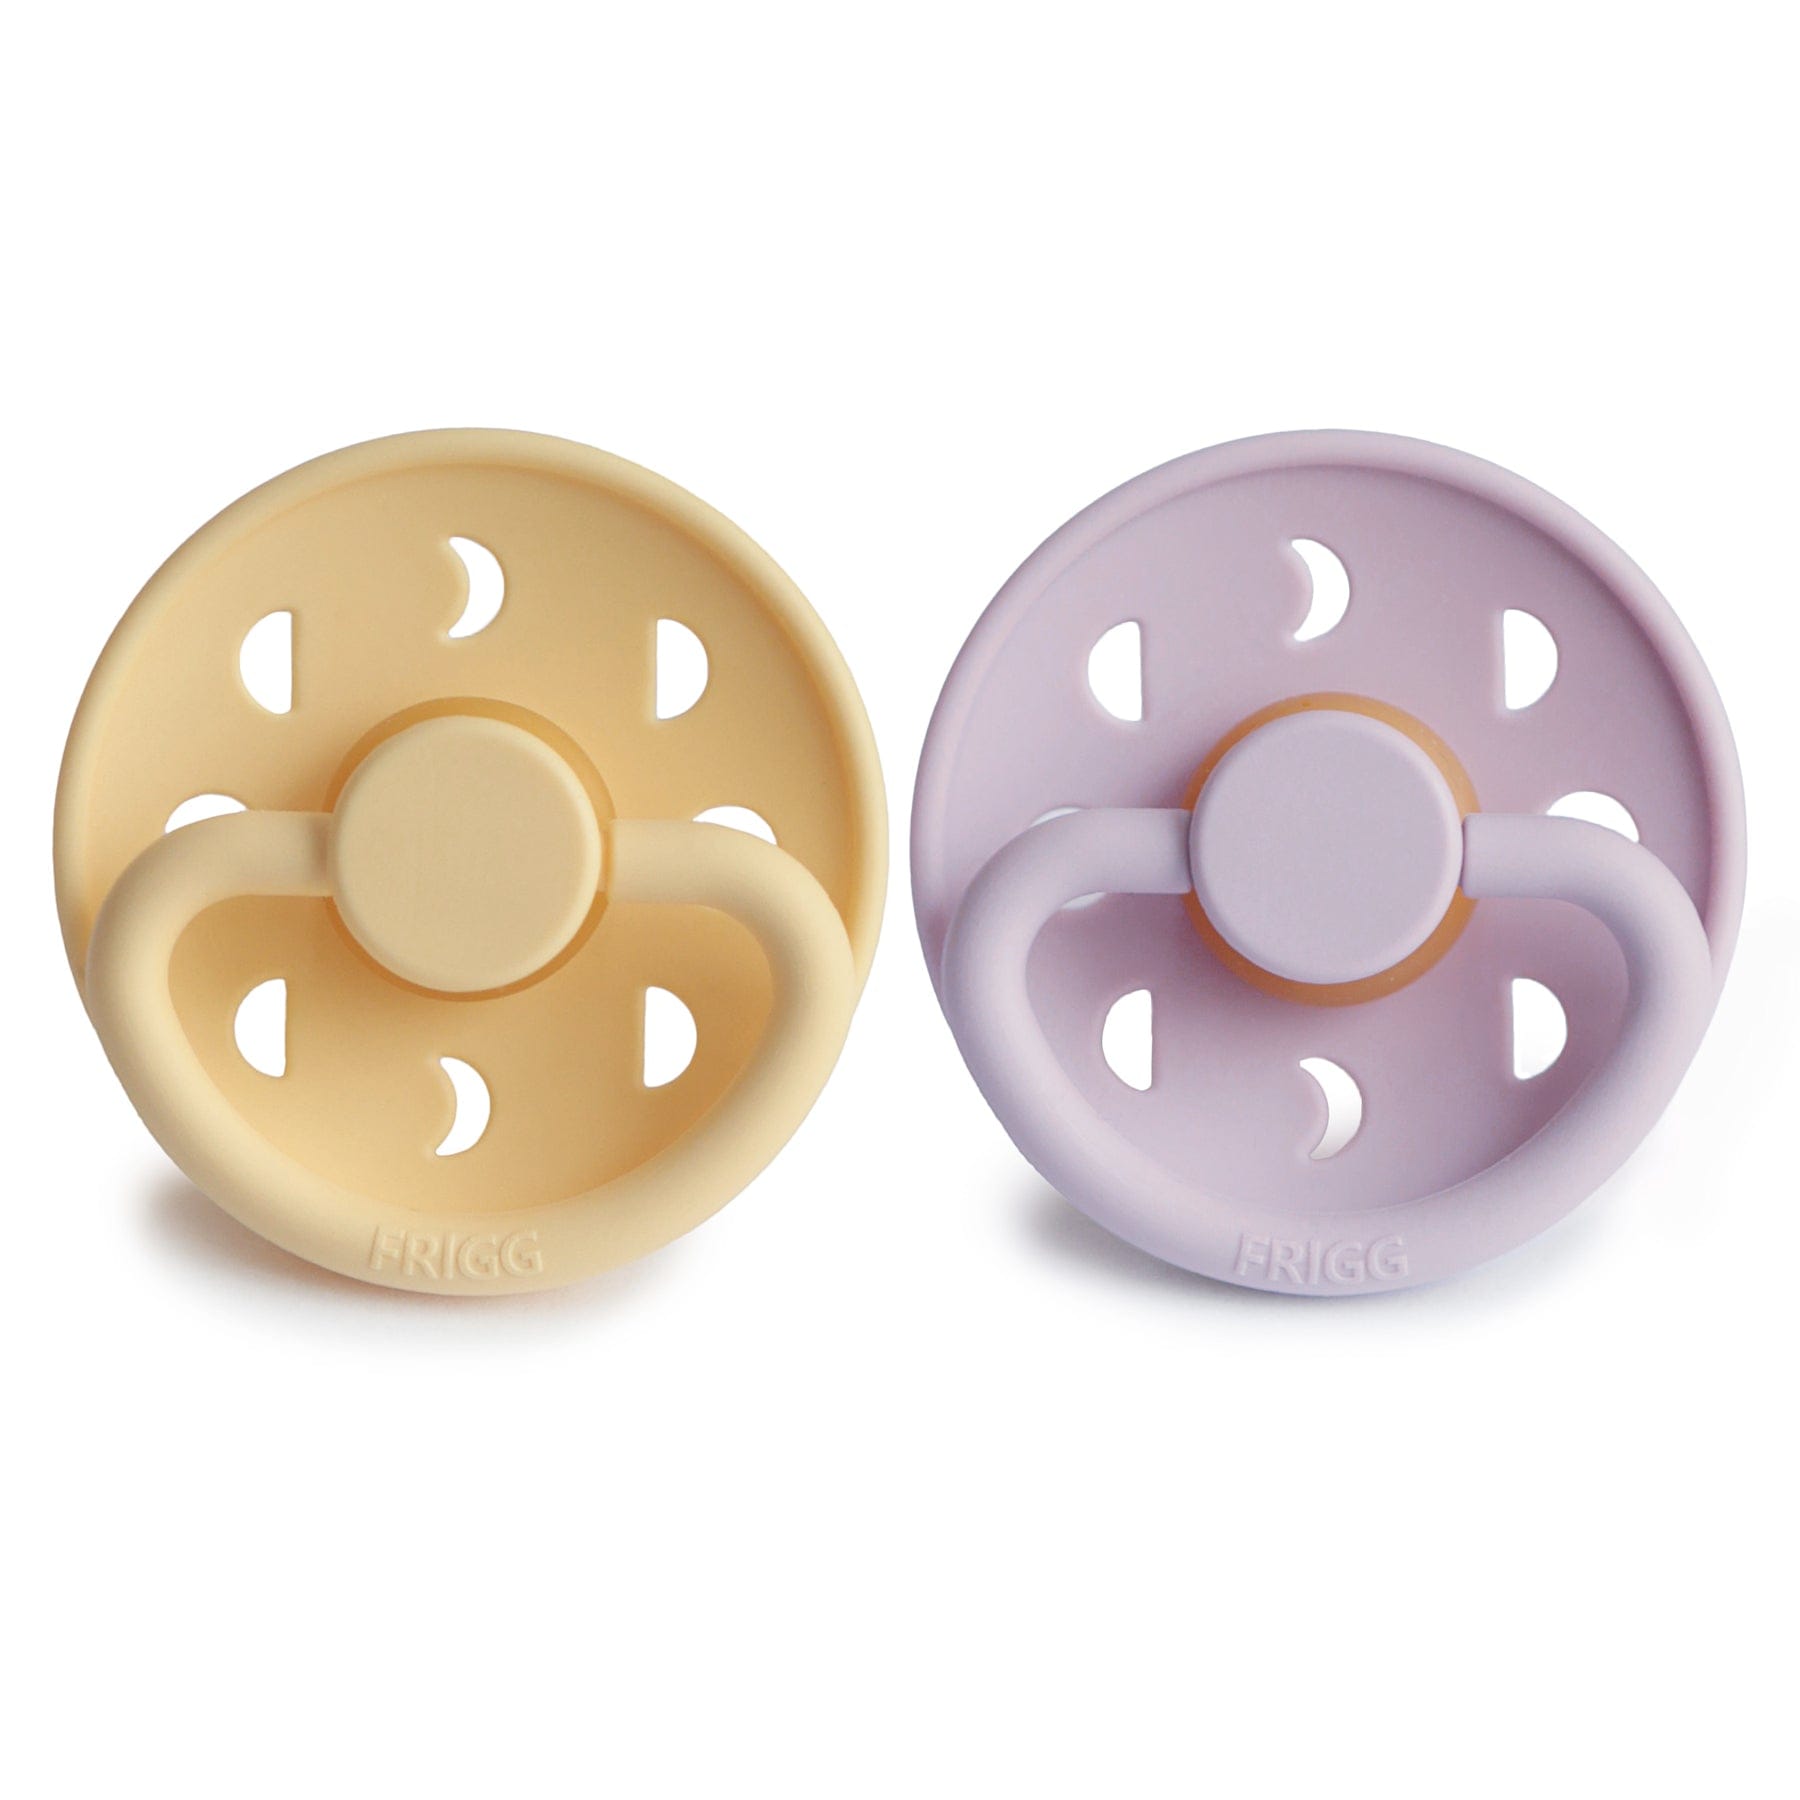 Mushie Soother FRIGG Moon Natural Rubber Baby Pacifier (Soft Lilac / Daffodil) 2-Pack